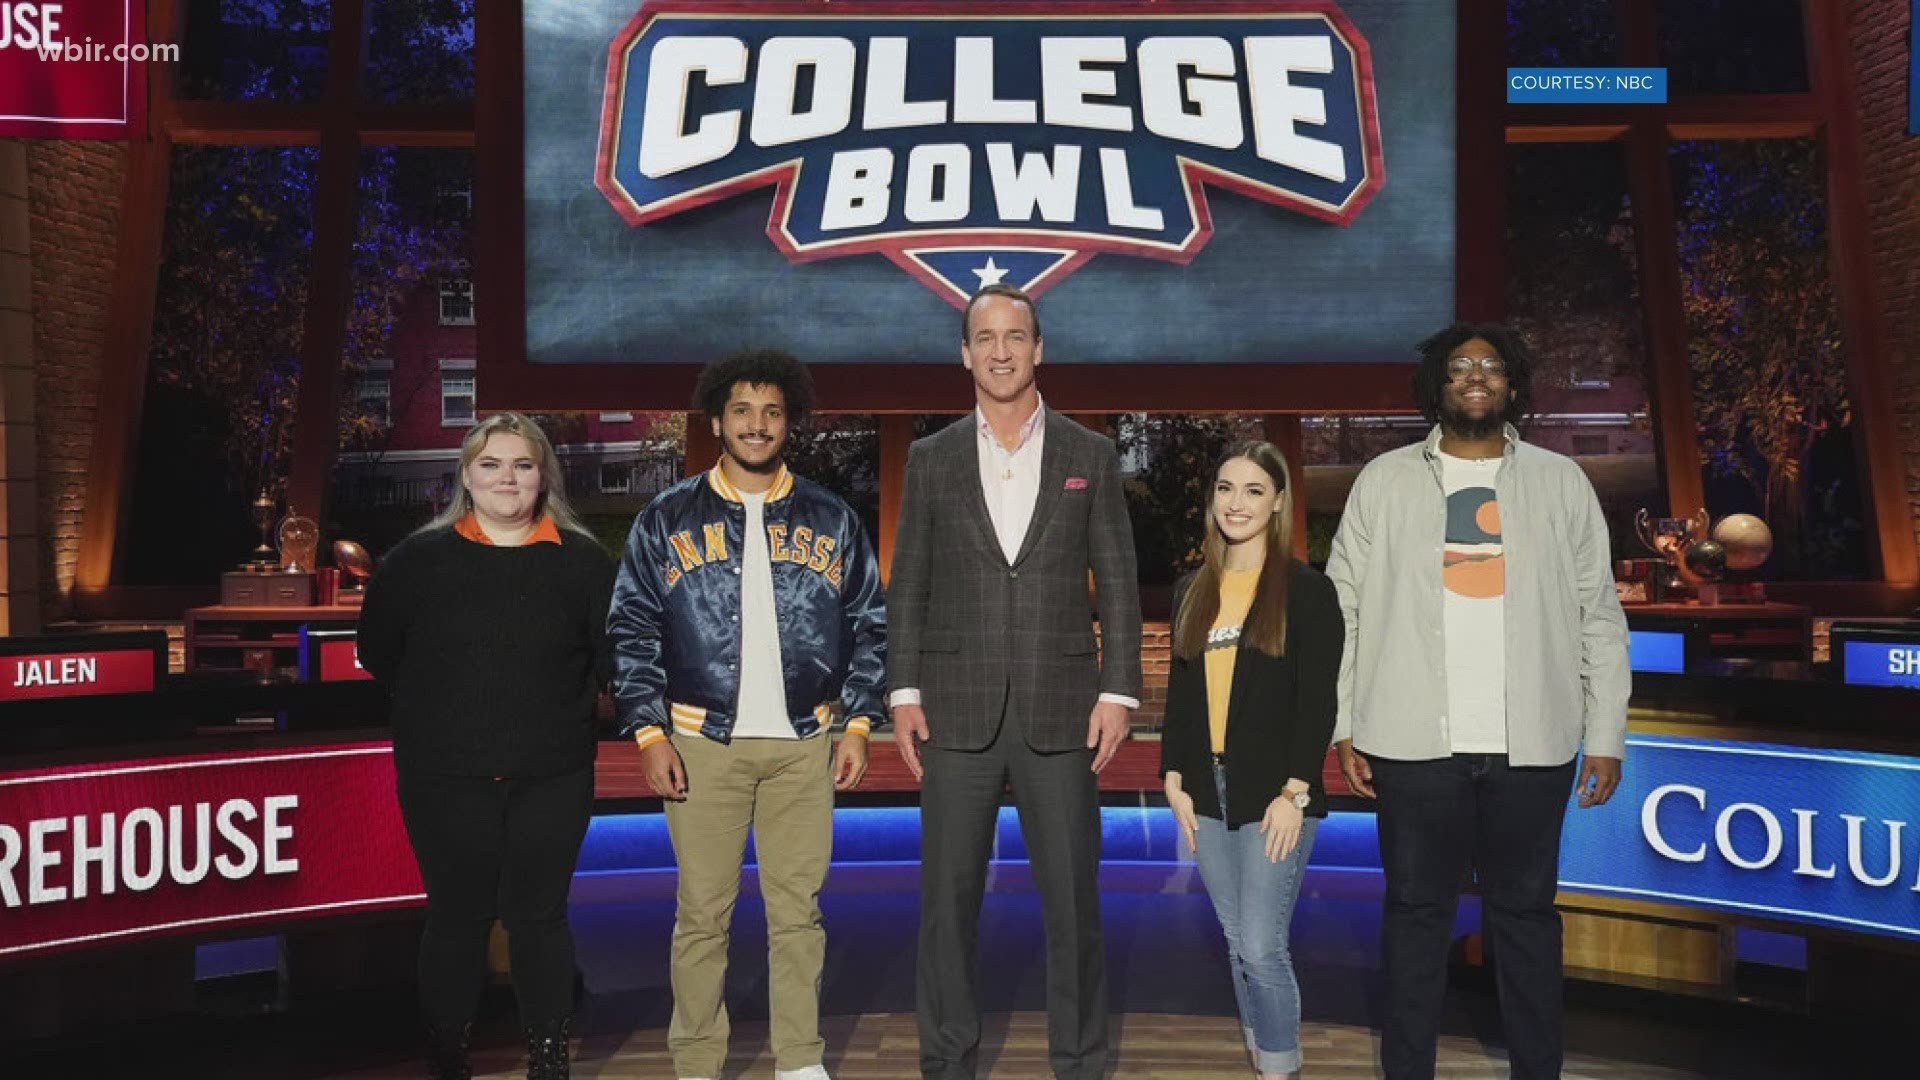 Paige Clark is a Knoxville native and nursing graduate who appears on the NBC quiz show hosted by Peyton Manning. June 29, 2021-4pm.